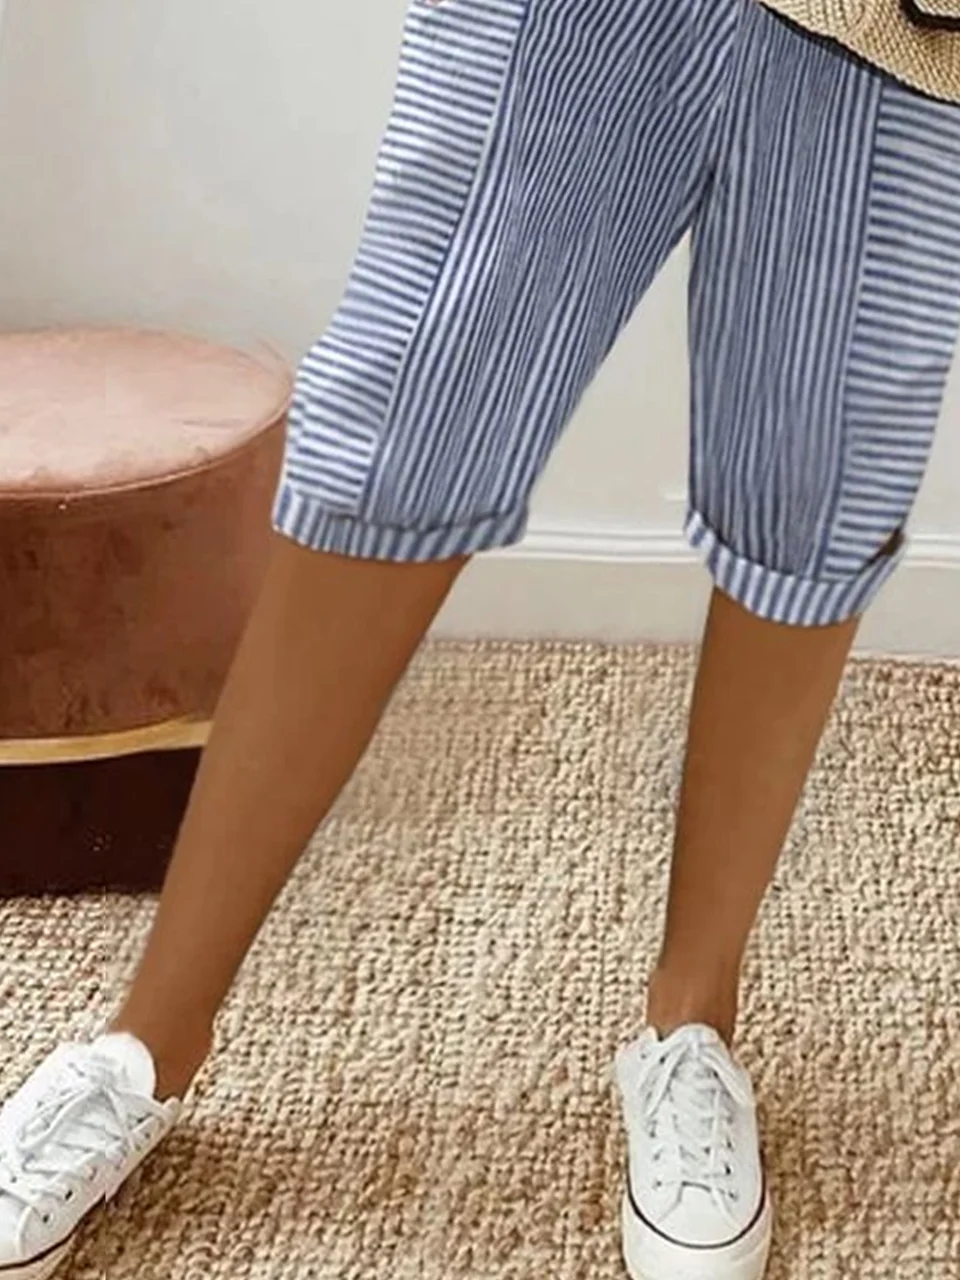 Casual Cotton Striped Pants